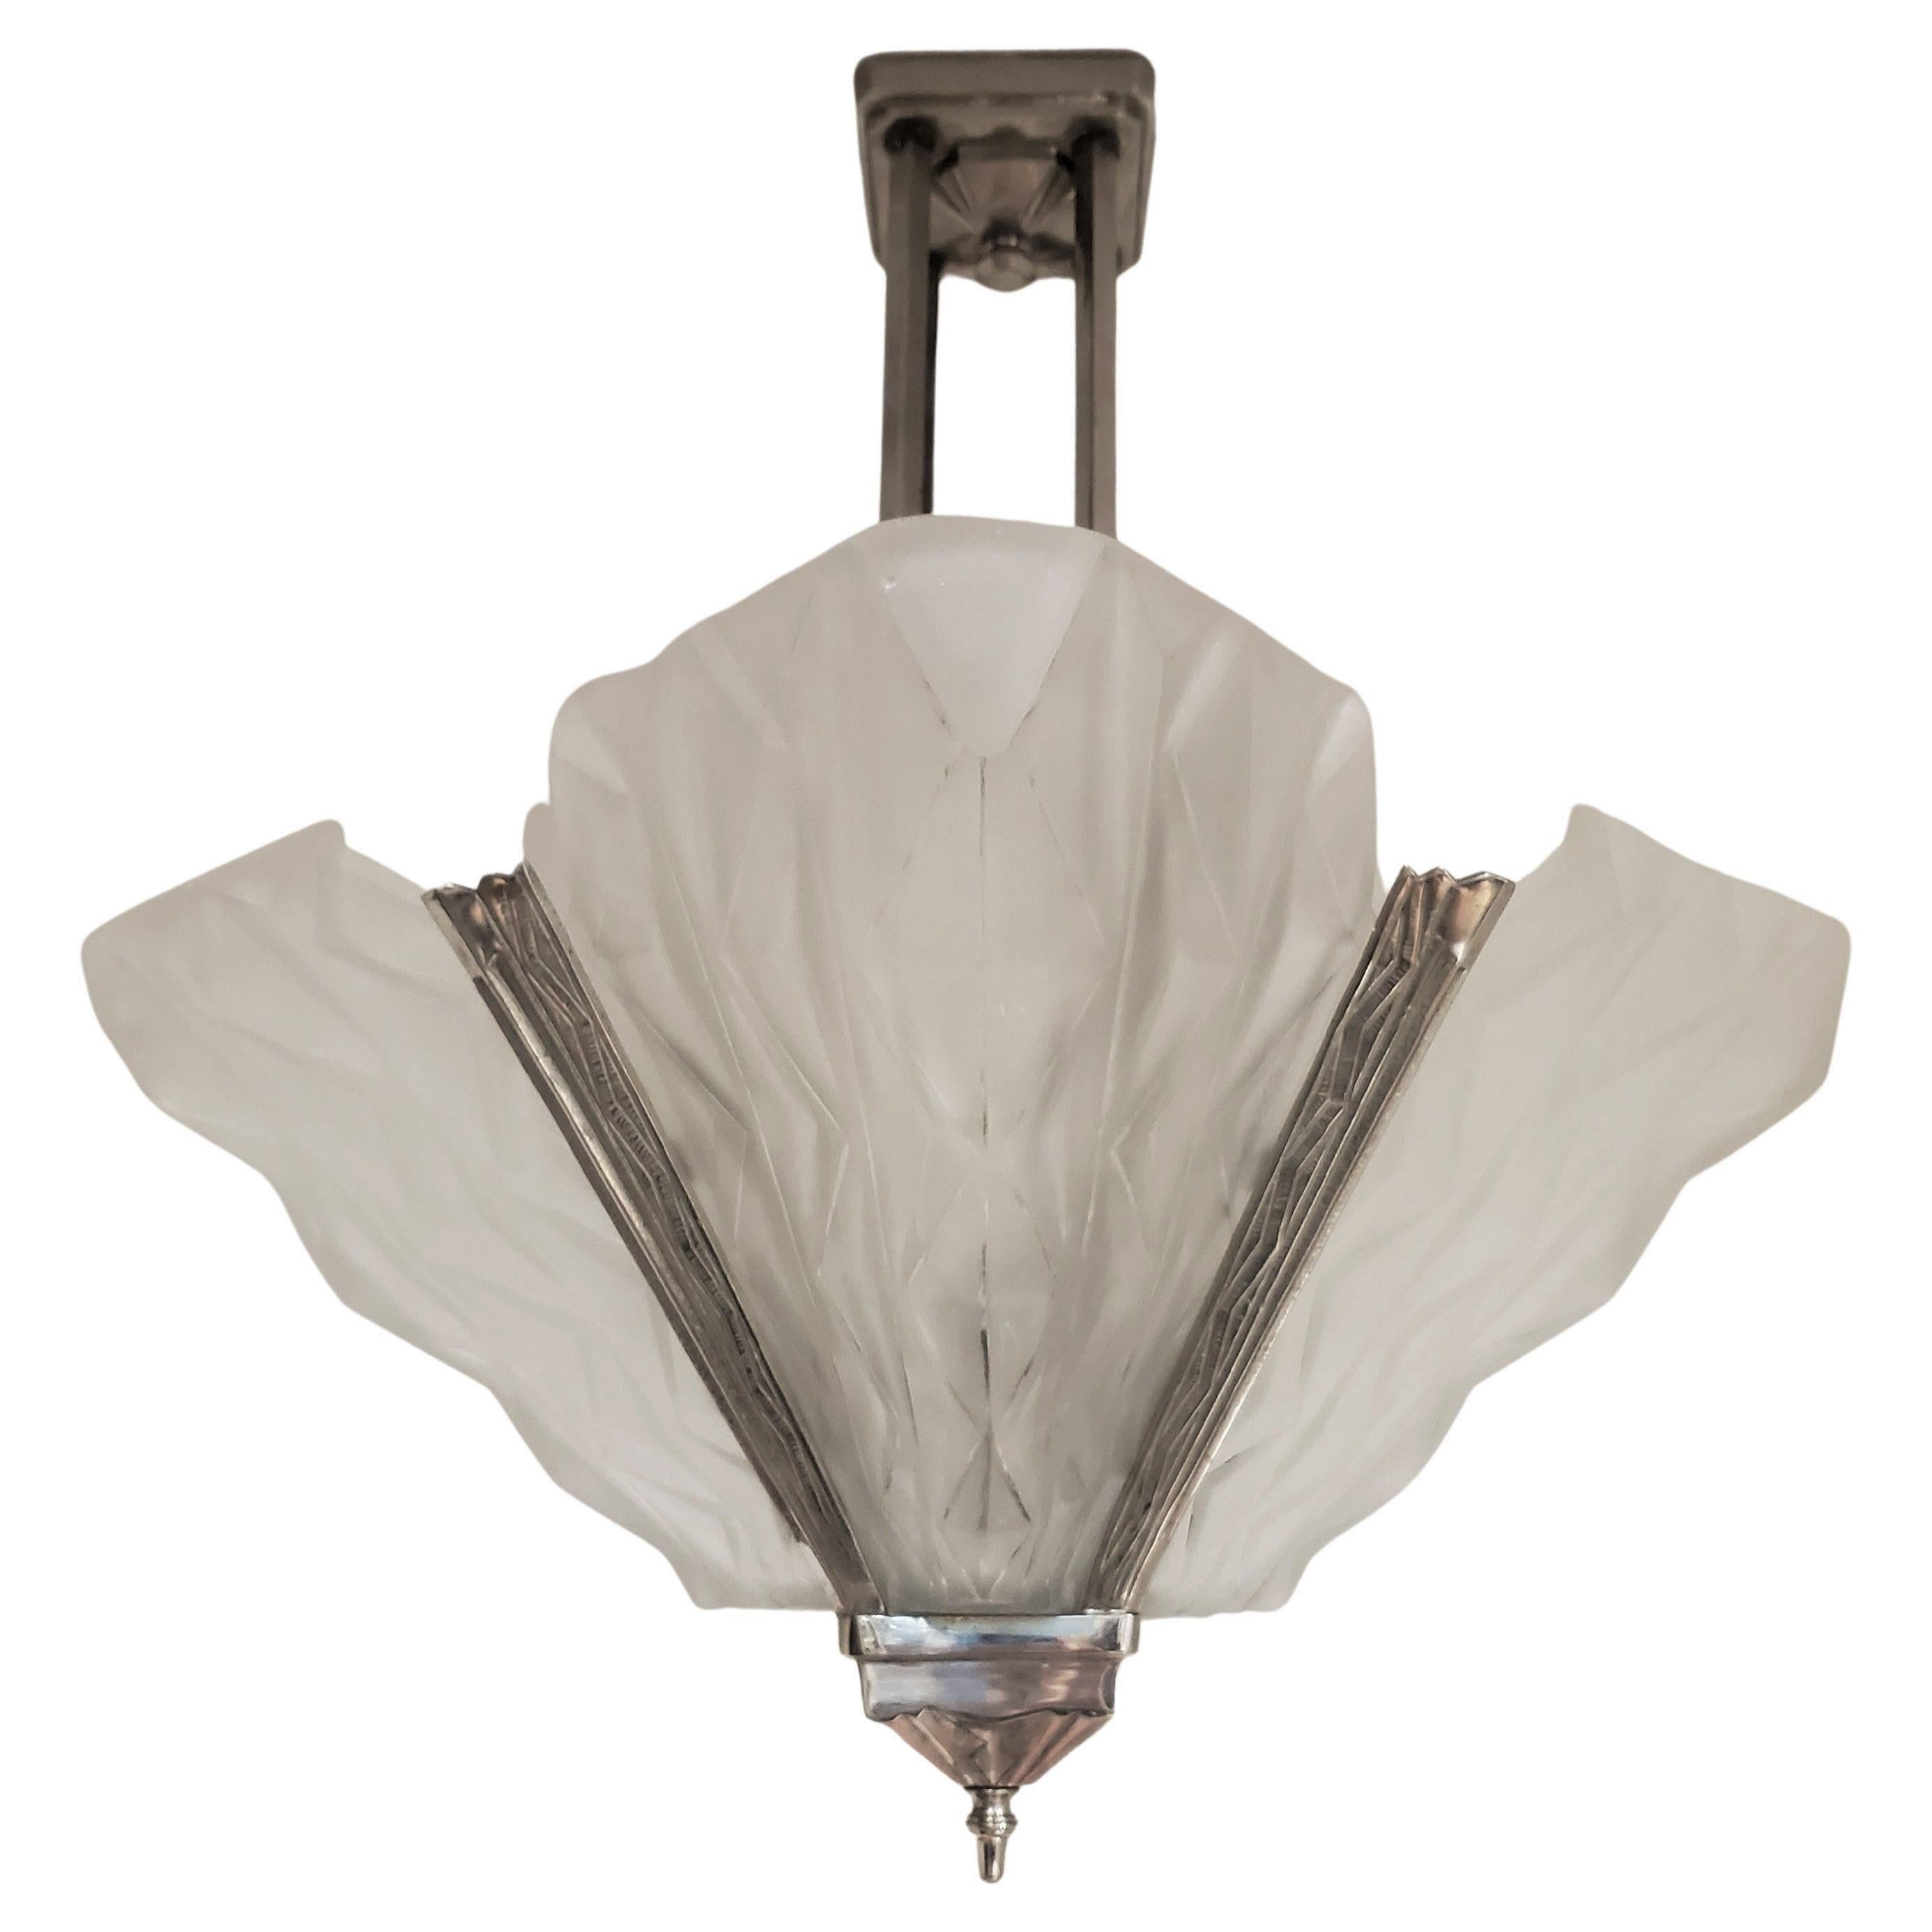 Impressive original French Art Deco chandelier signed: Degue
 featuring a stunning design with four substantially large shield-shaped panels, each adorned with intricate geometric patterns. These bulbous panels are set within an ornate nickel-bronze